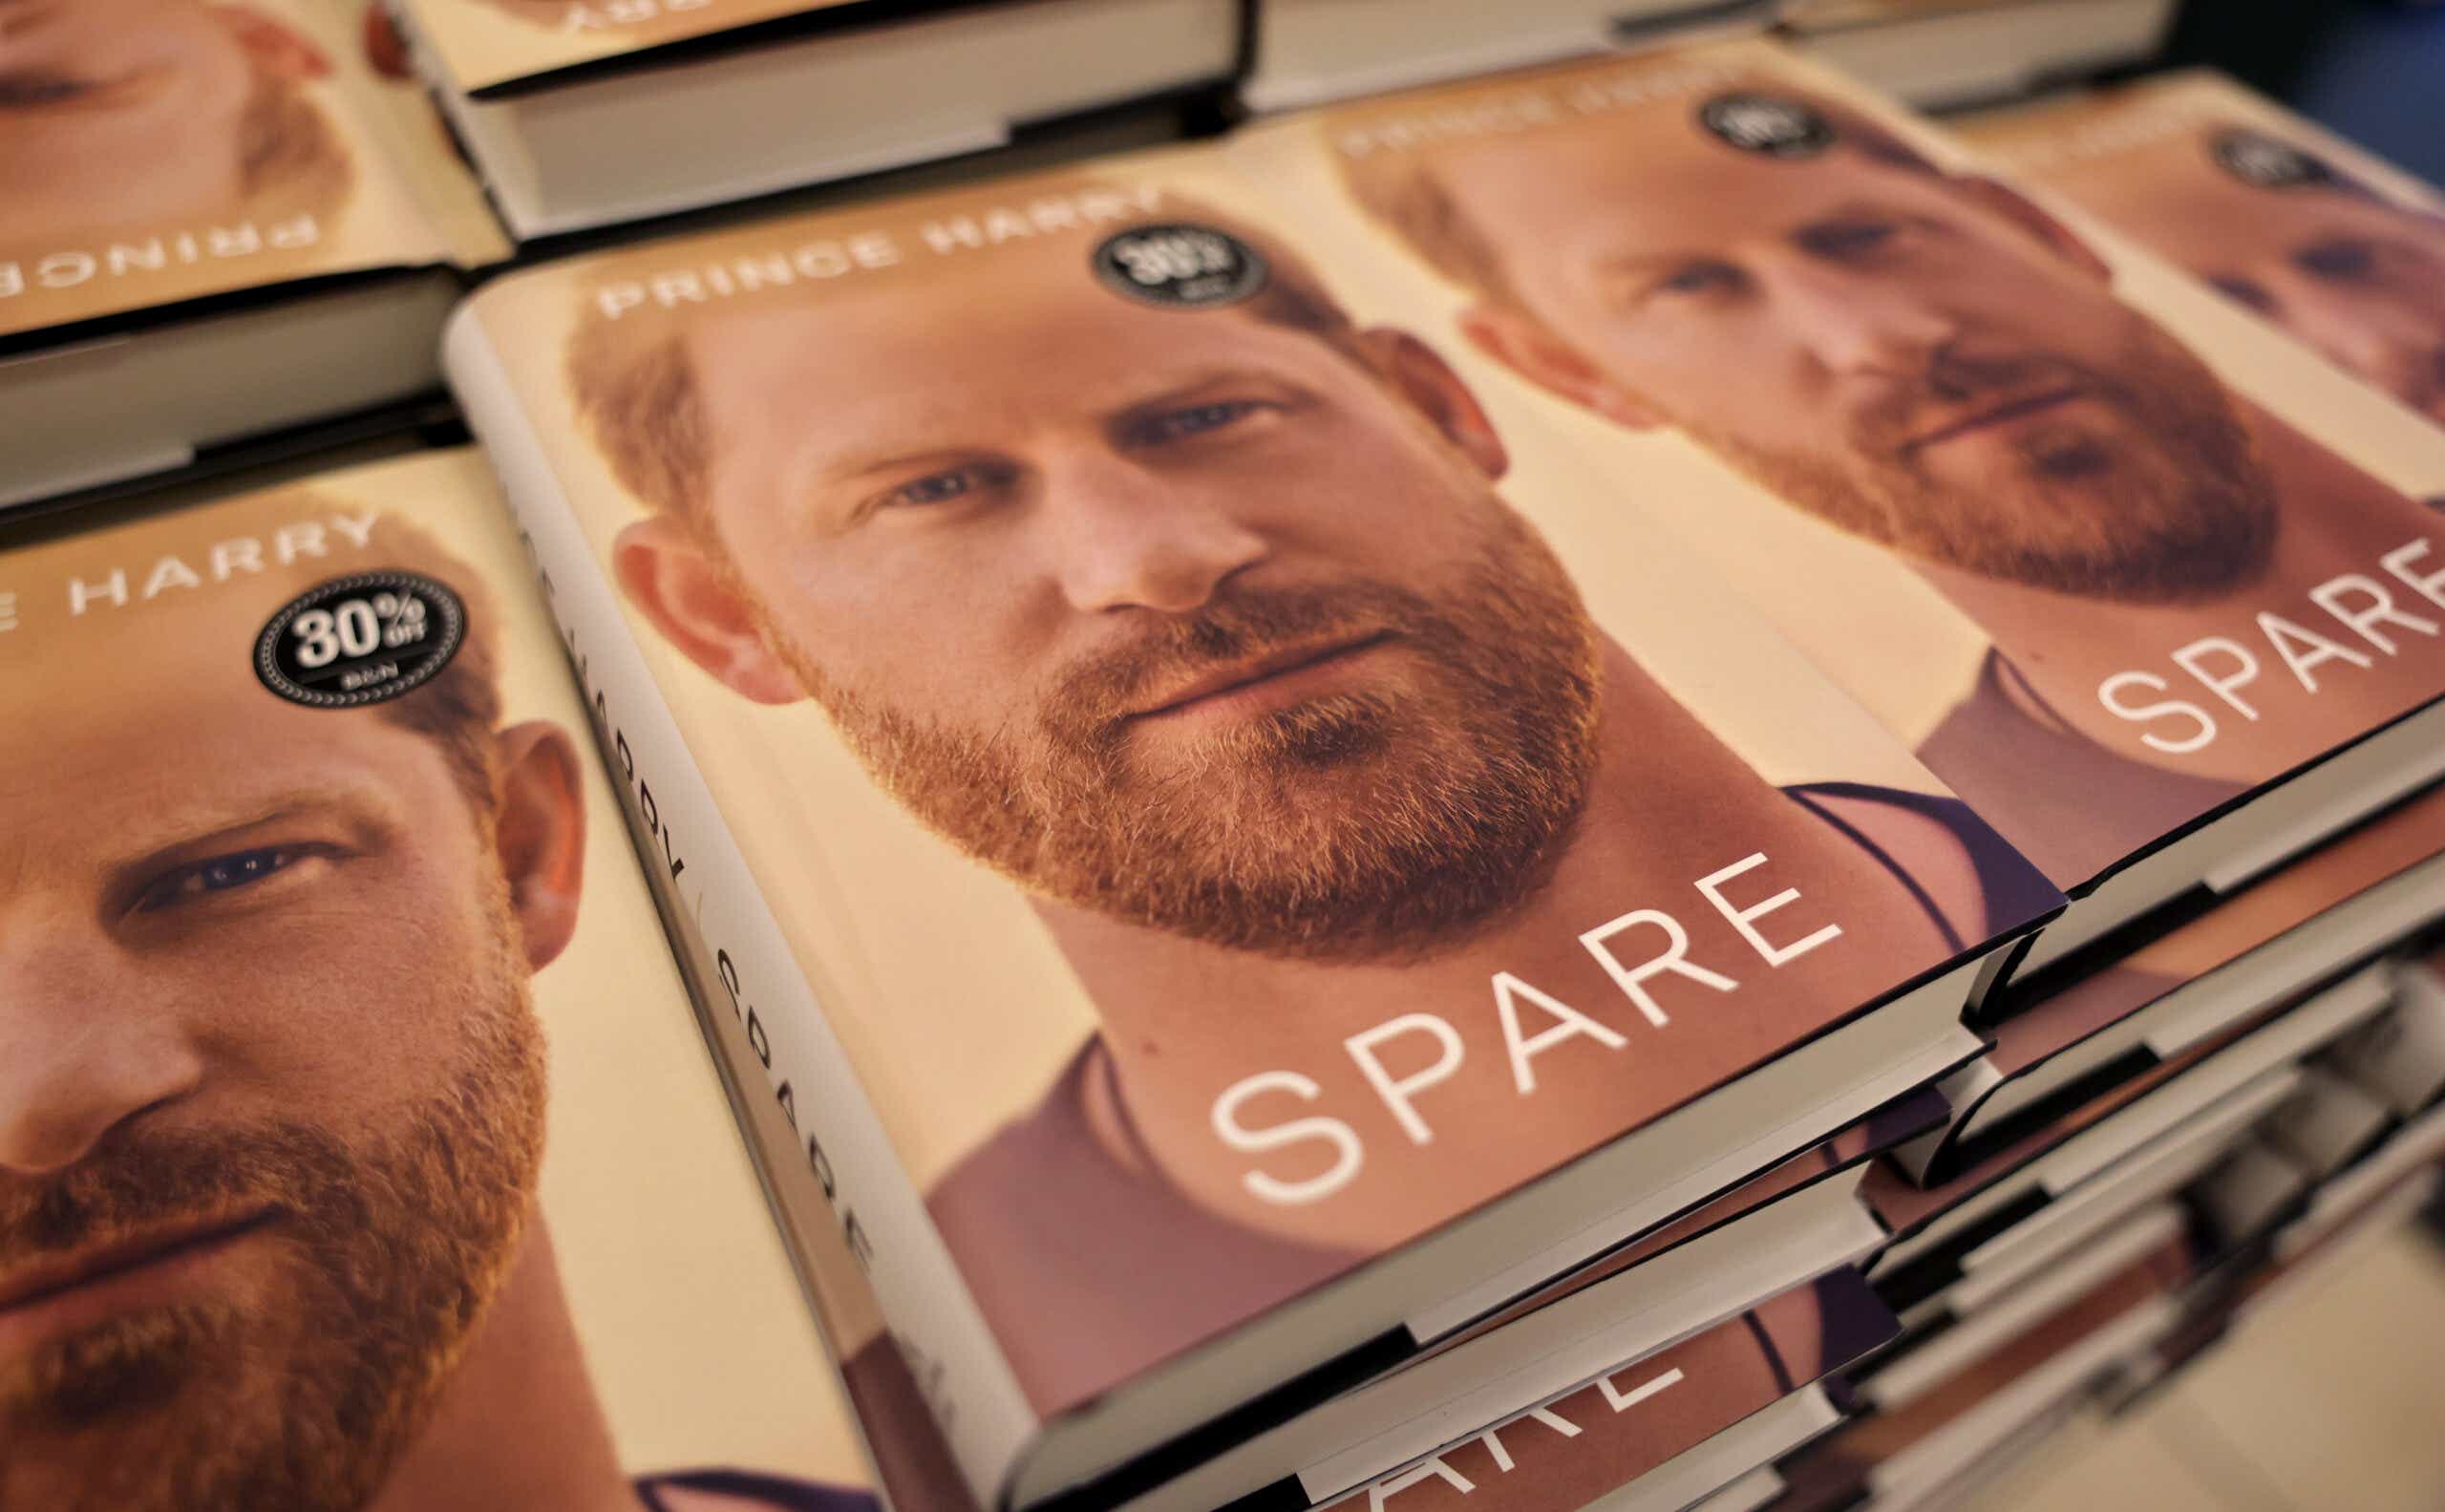 Prince Harry's memoir Spare is offered for sale